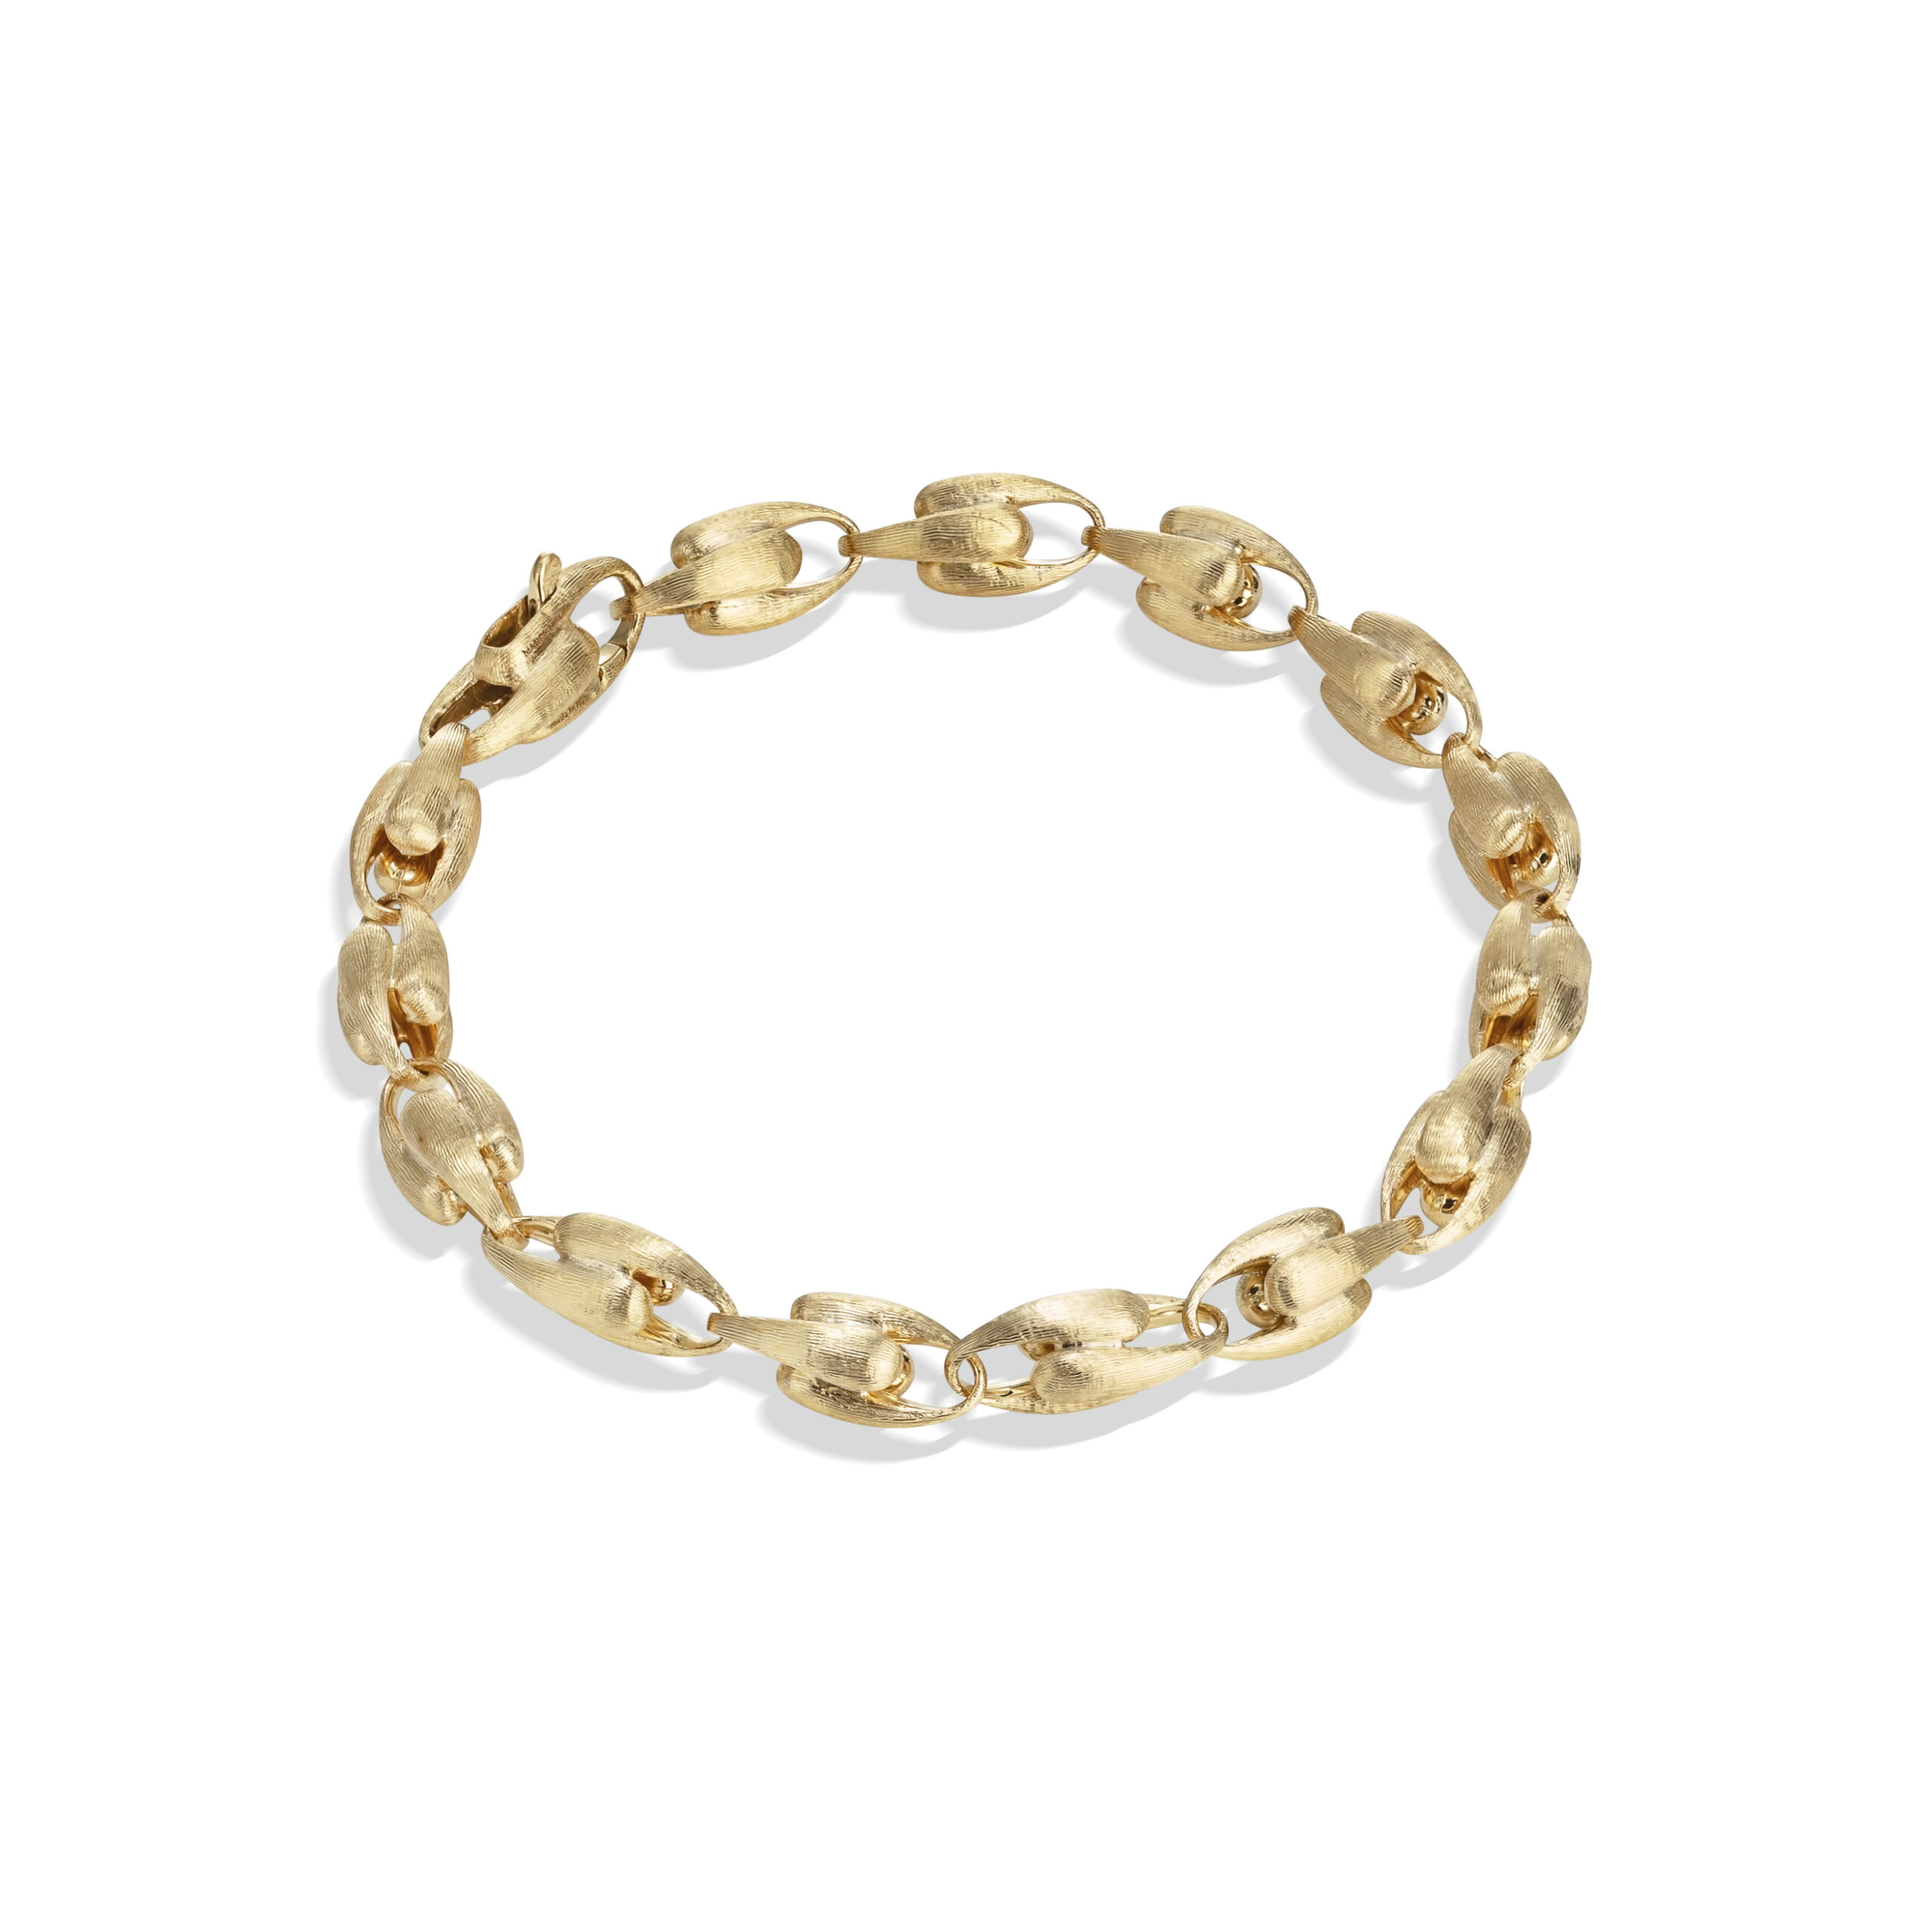 BB2361 Y 02Marco Bicego Lucia Collection 18k Yellow Gold Small Link Bracelet